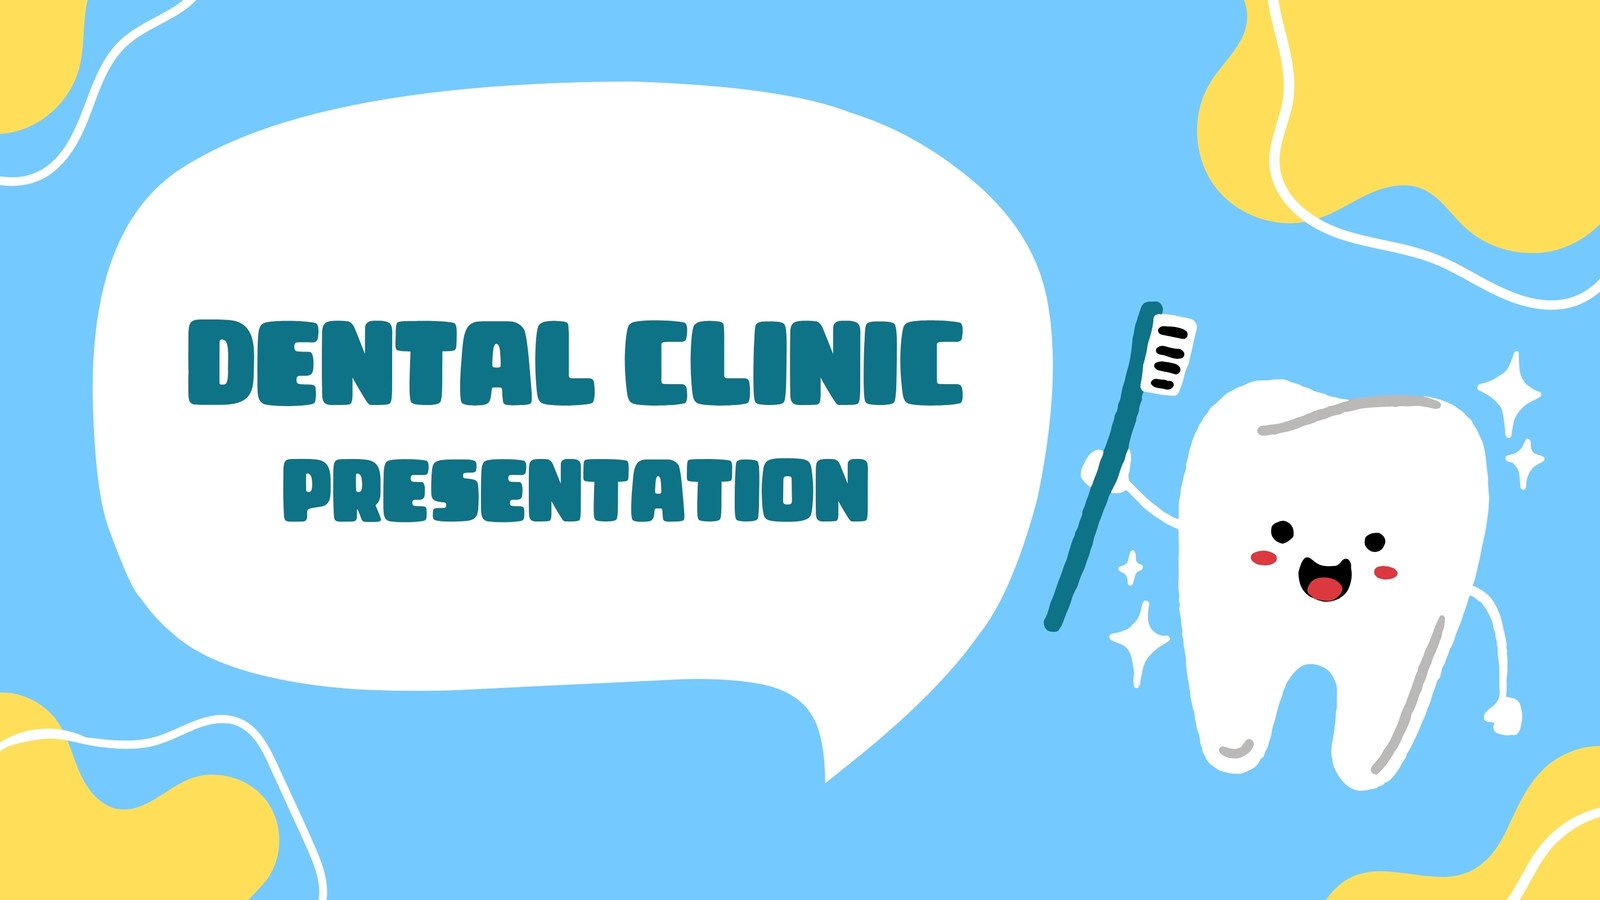 Sydney Clinic Dental Treatment Youtube Youtube Background, Dentist Dental  Dental Dentist, Hd Photography Photo, Property Background Image And  Wallpaper for Free Download